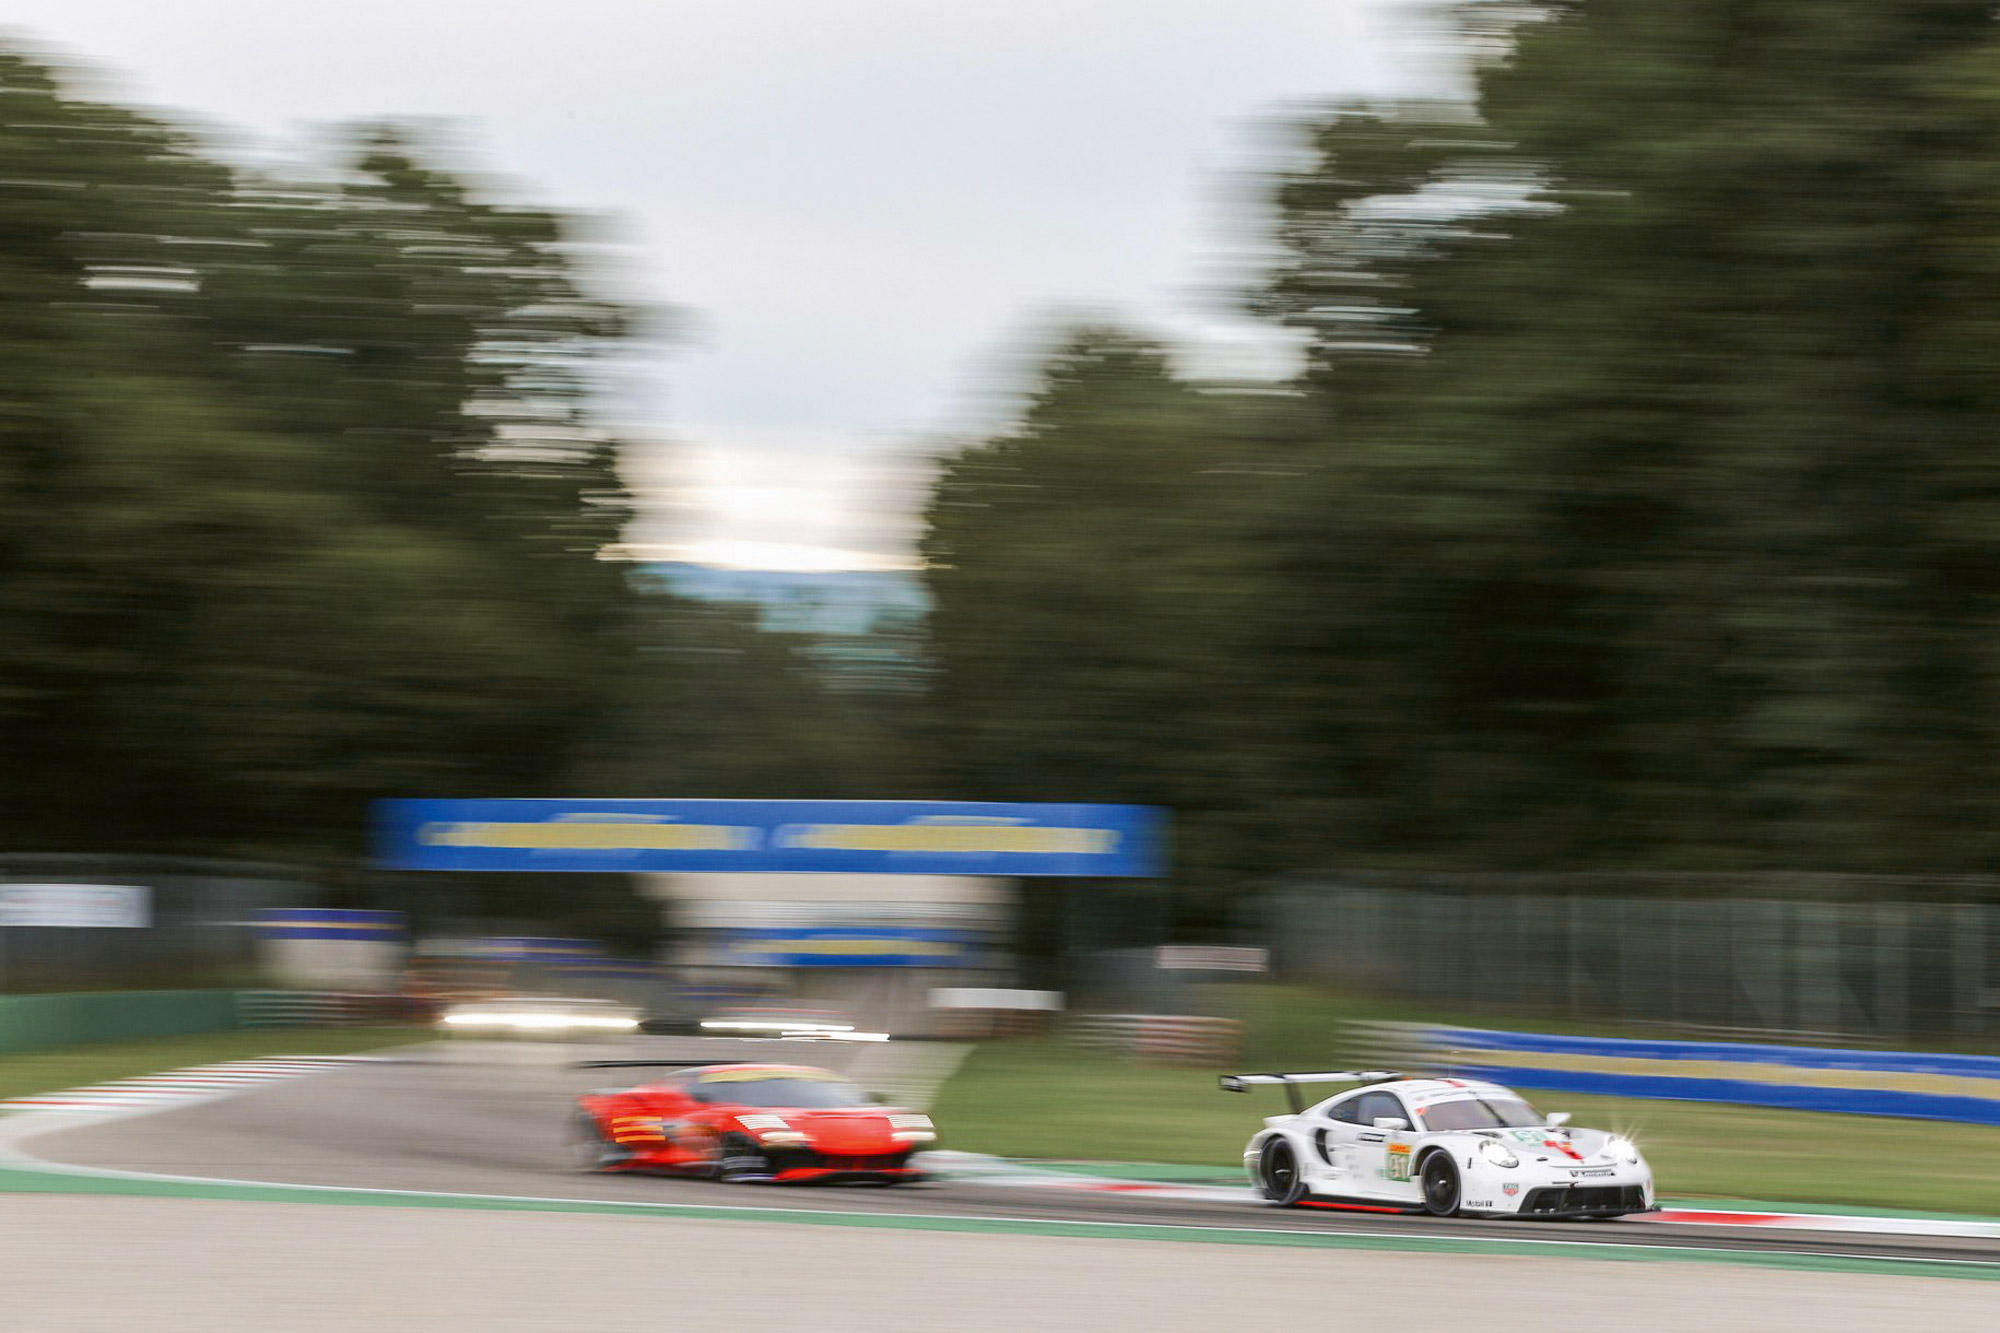 Two racing cars during a race in Monza